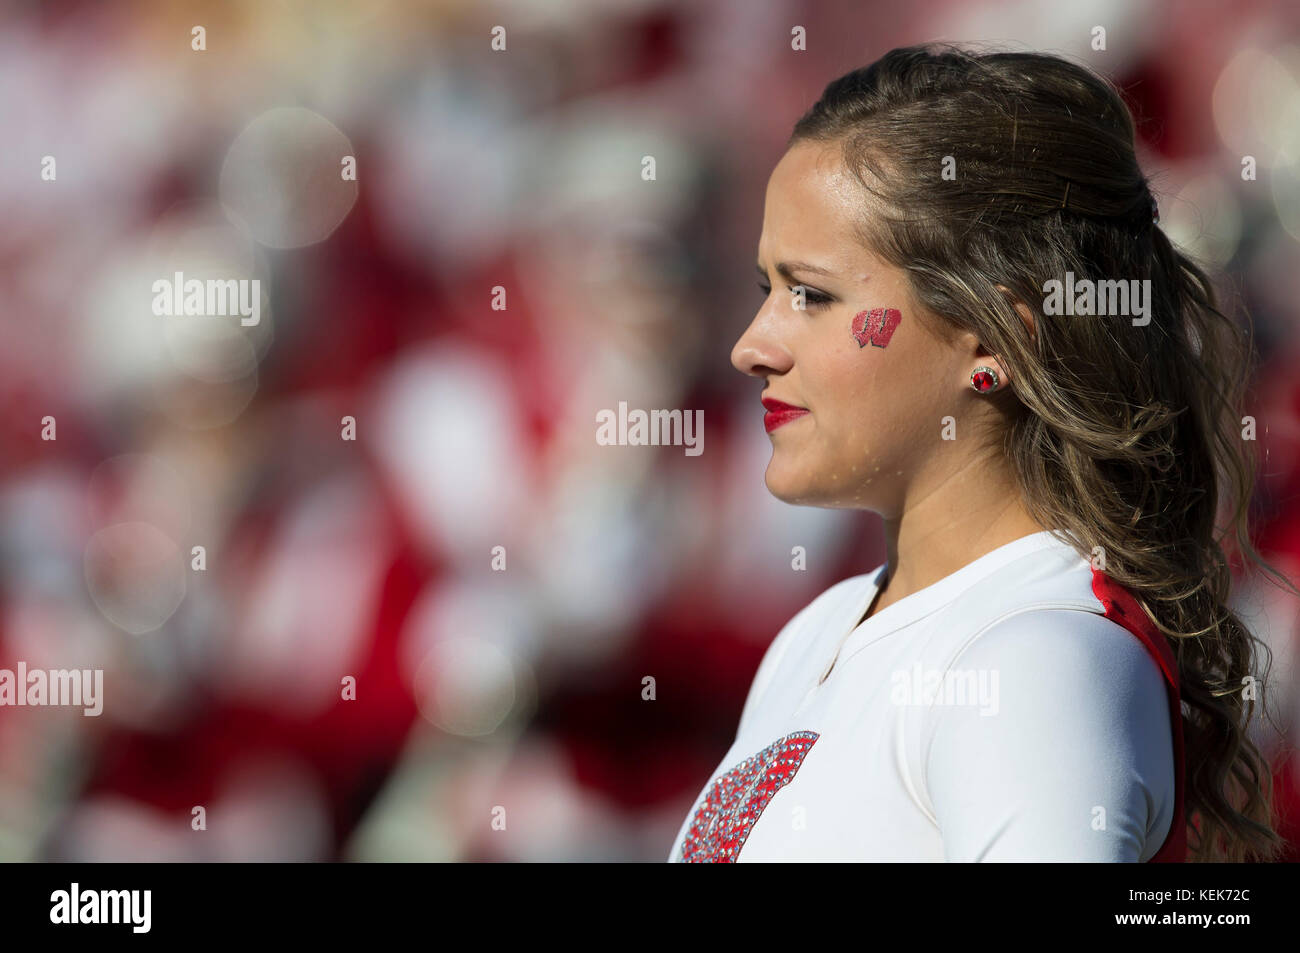 Madison, WI, USA. 21st Oct, 2017. Wisconsin dance team member entertains the crowd prior to the NCAA Football game between the Maryland Terrapins and the Wisconsin Badgers at Camp Randall Stadium in Madison, WI. Wisconsin defeated Maryland 38-18. John Fisher/CSM/Alamy Live News Stock Photo